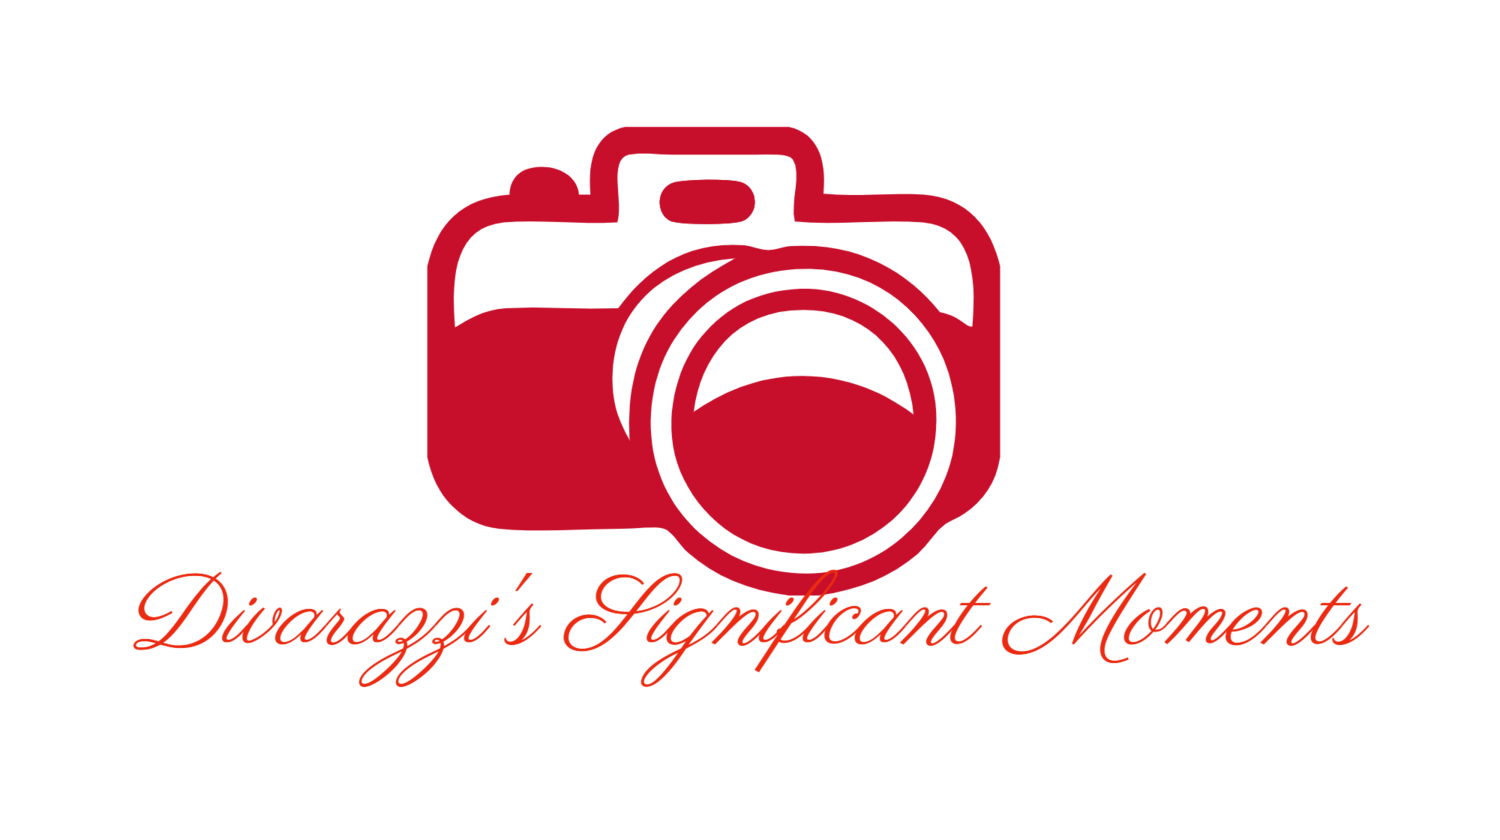 Significant Moments Photography